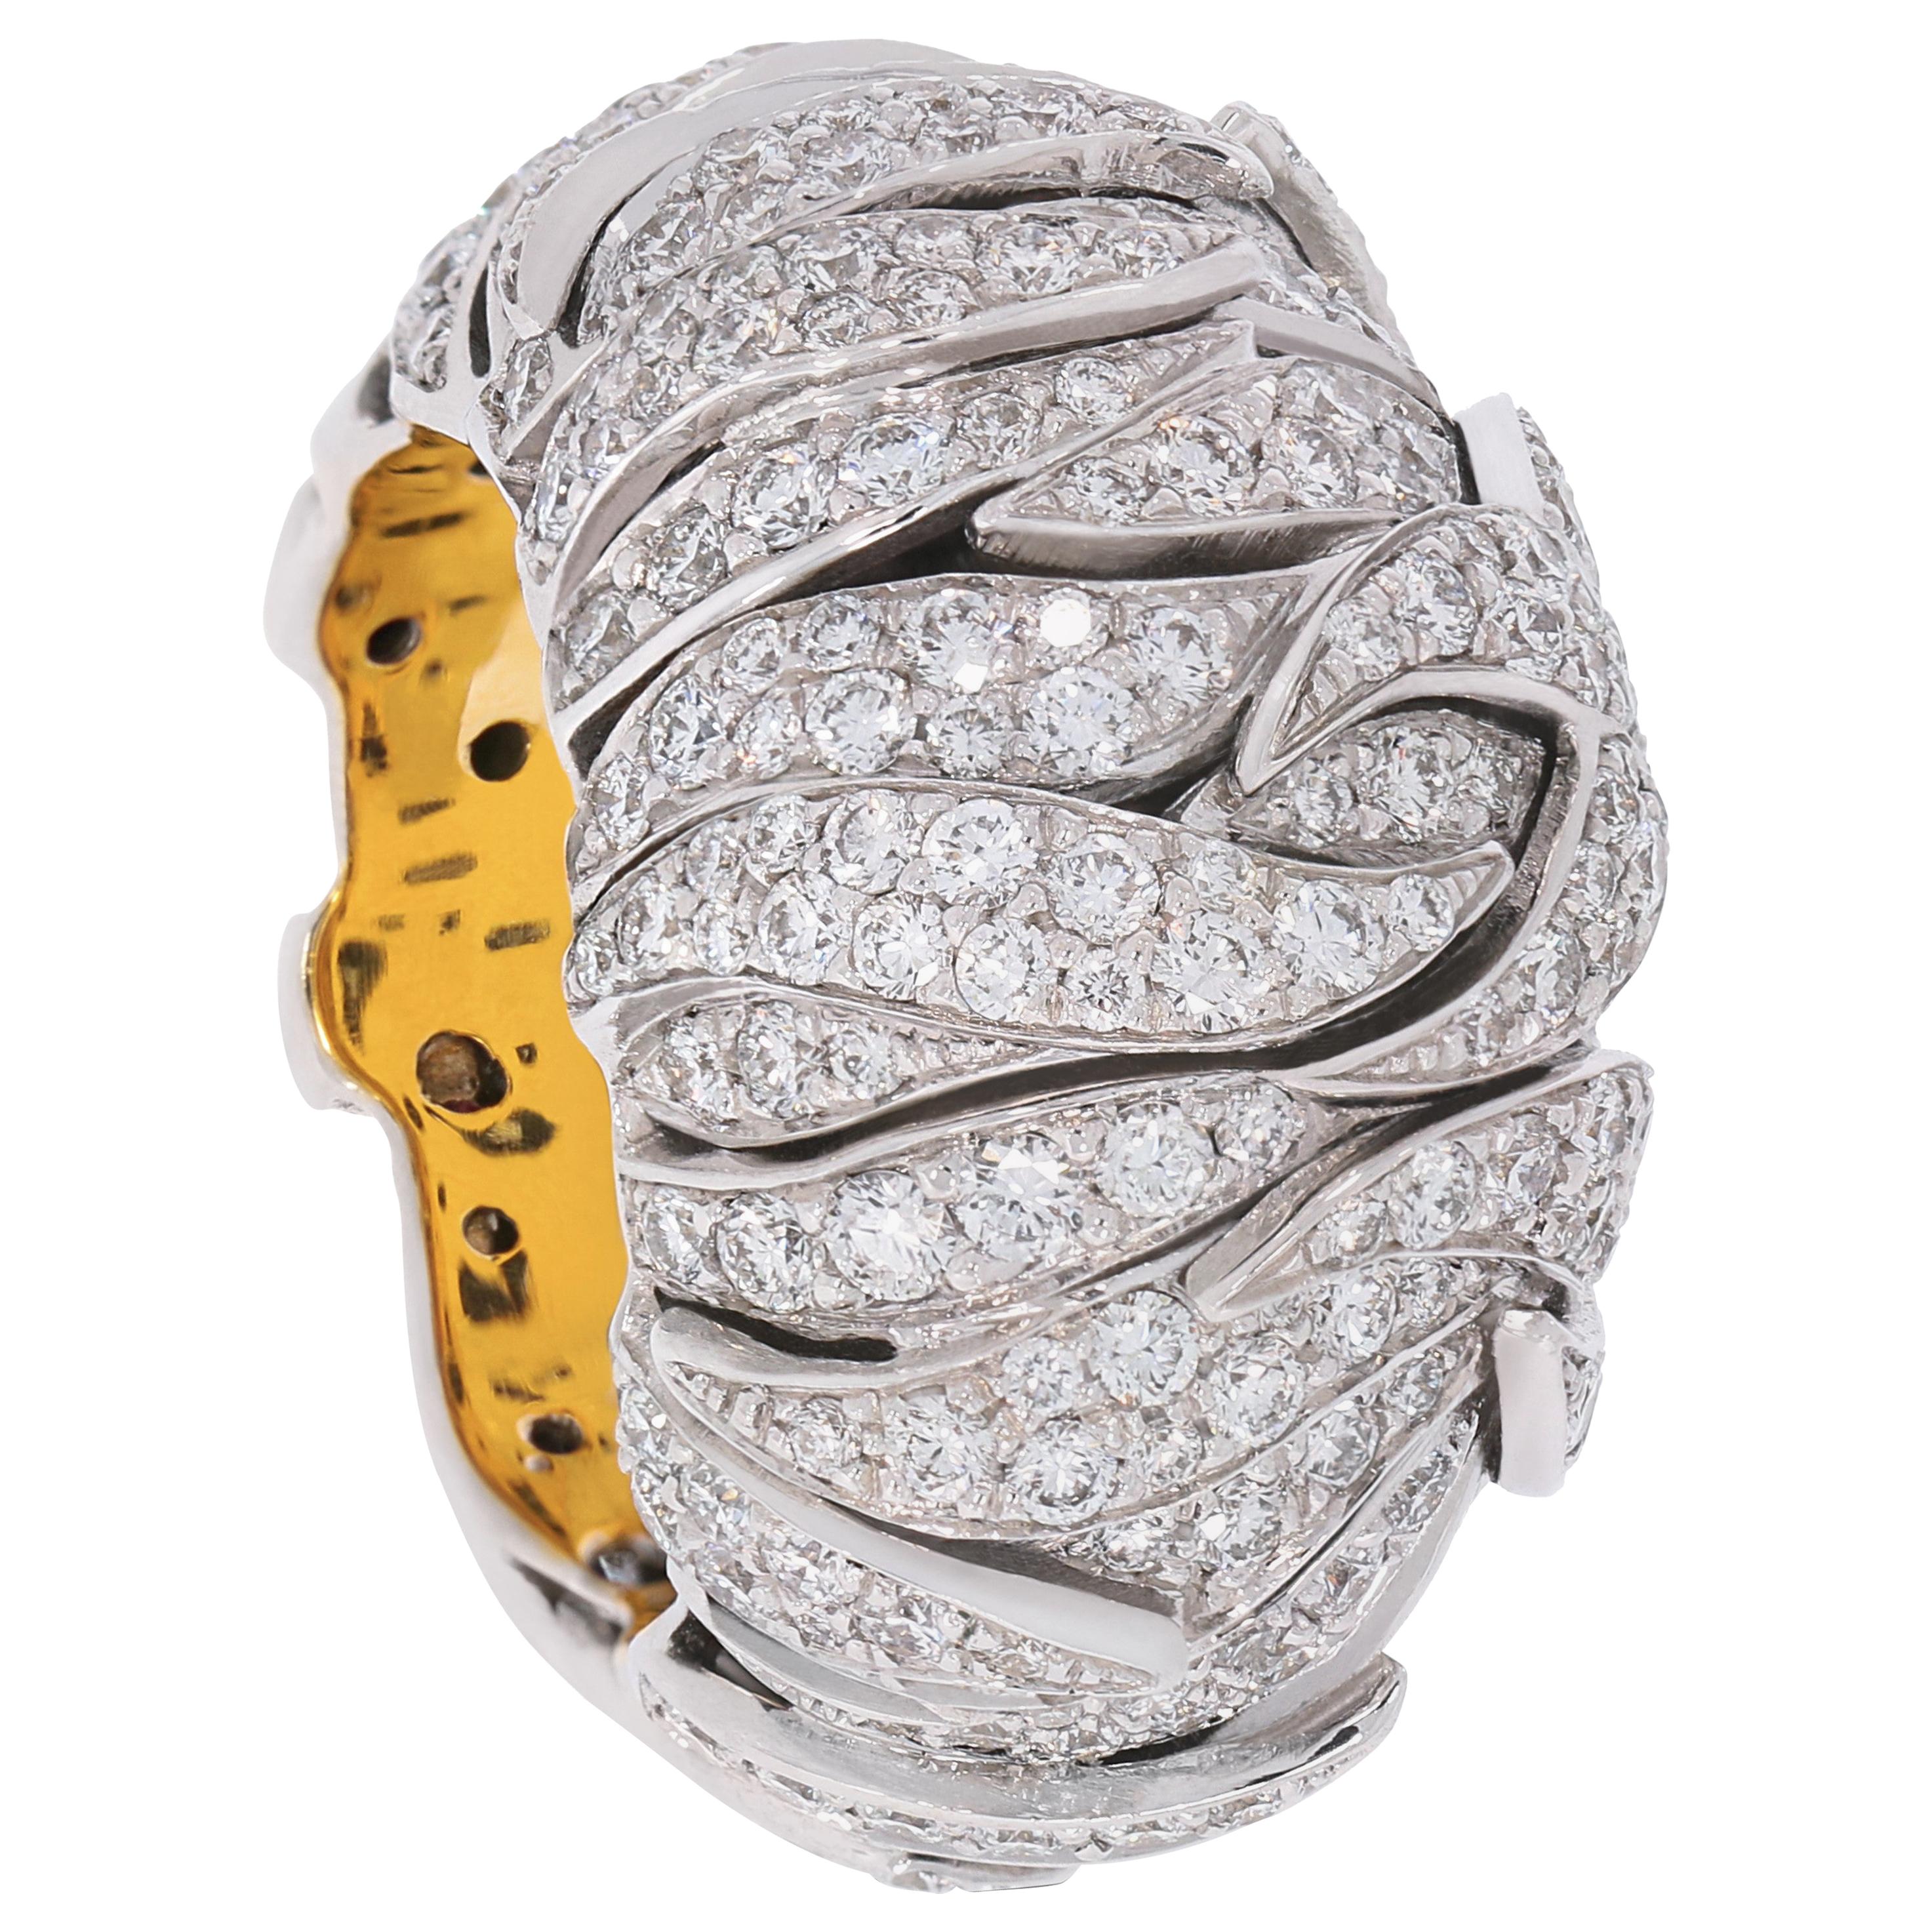 Rosior one-off Diamond Dome Ring set in White and Yellow Gold